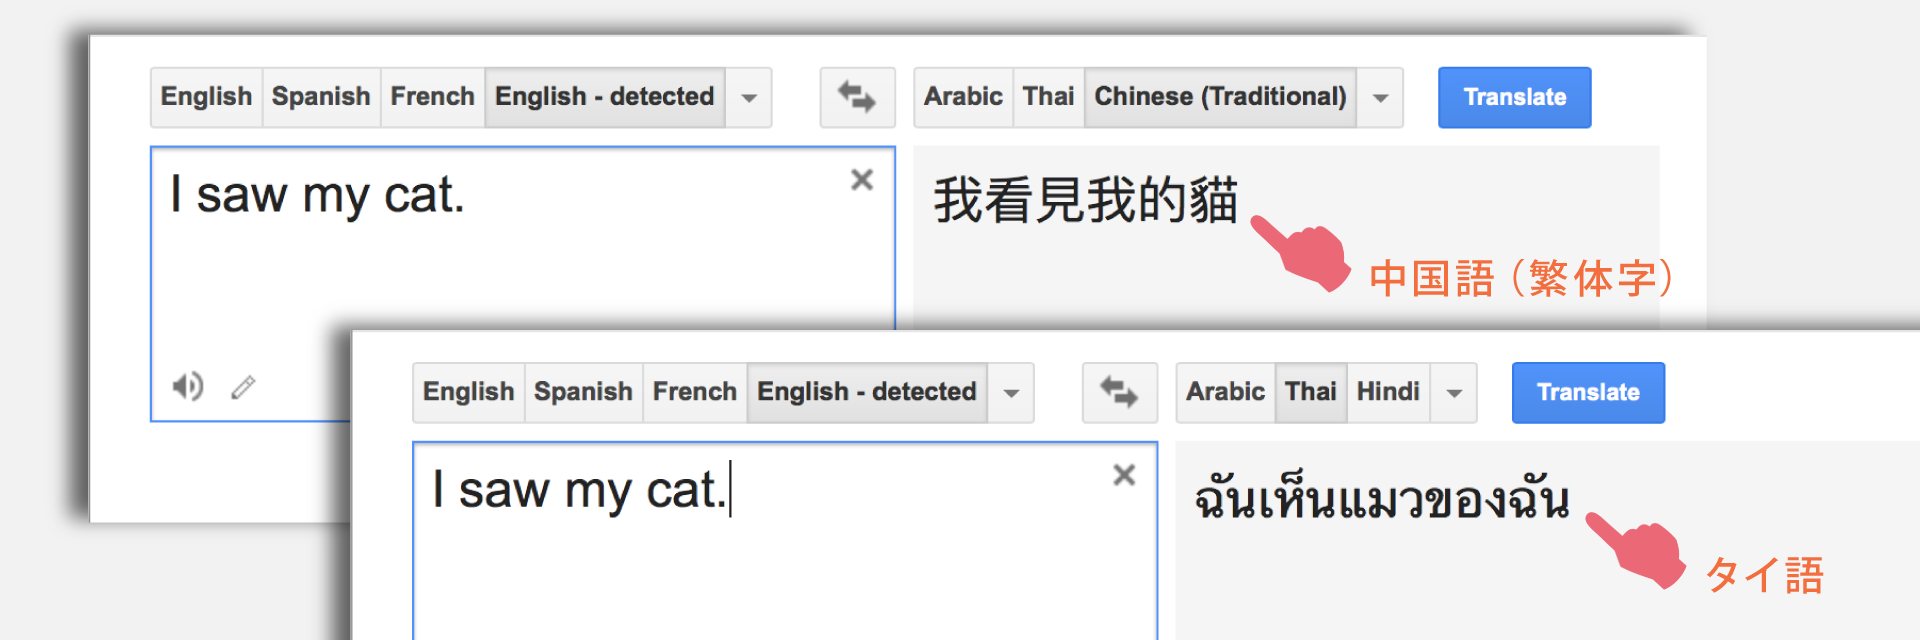 Thai and Chinese examples of spacing between words